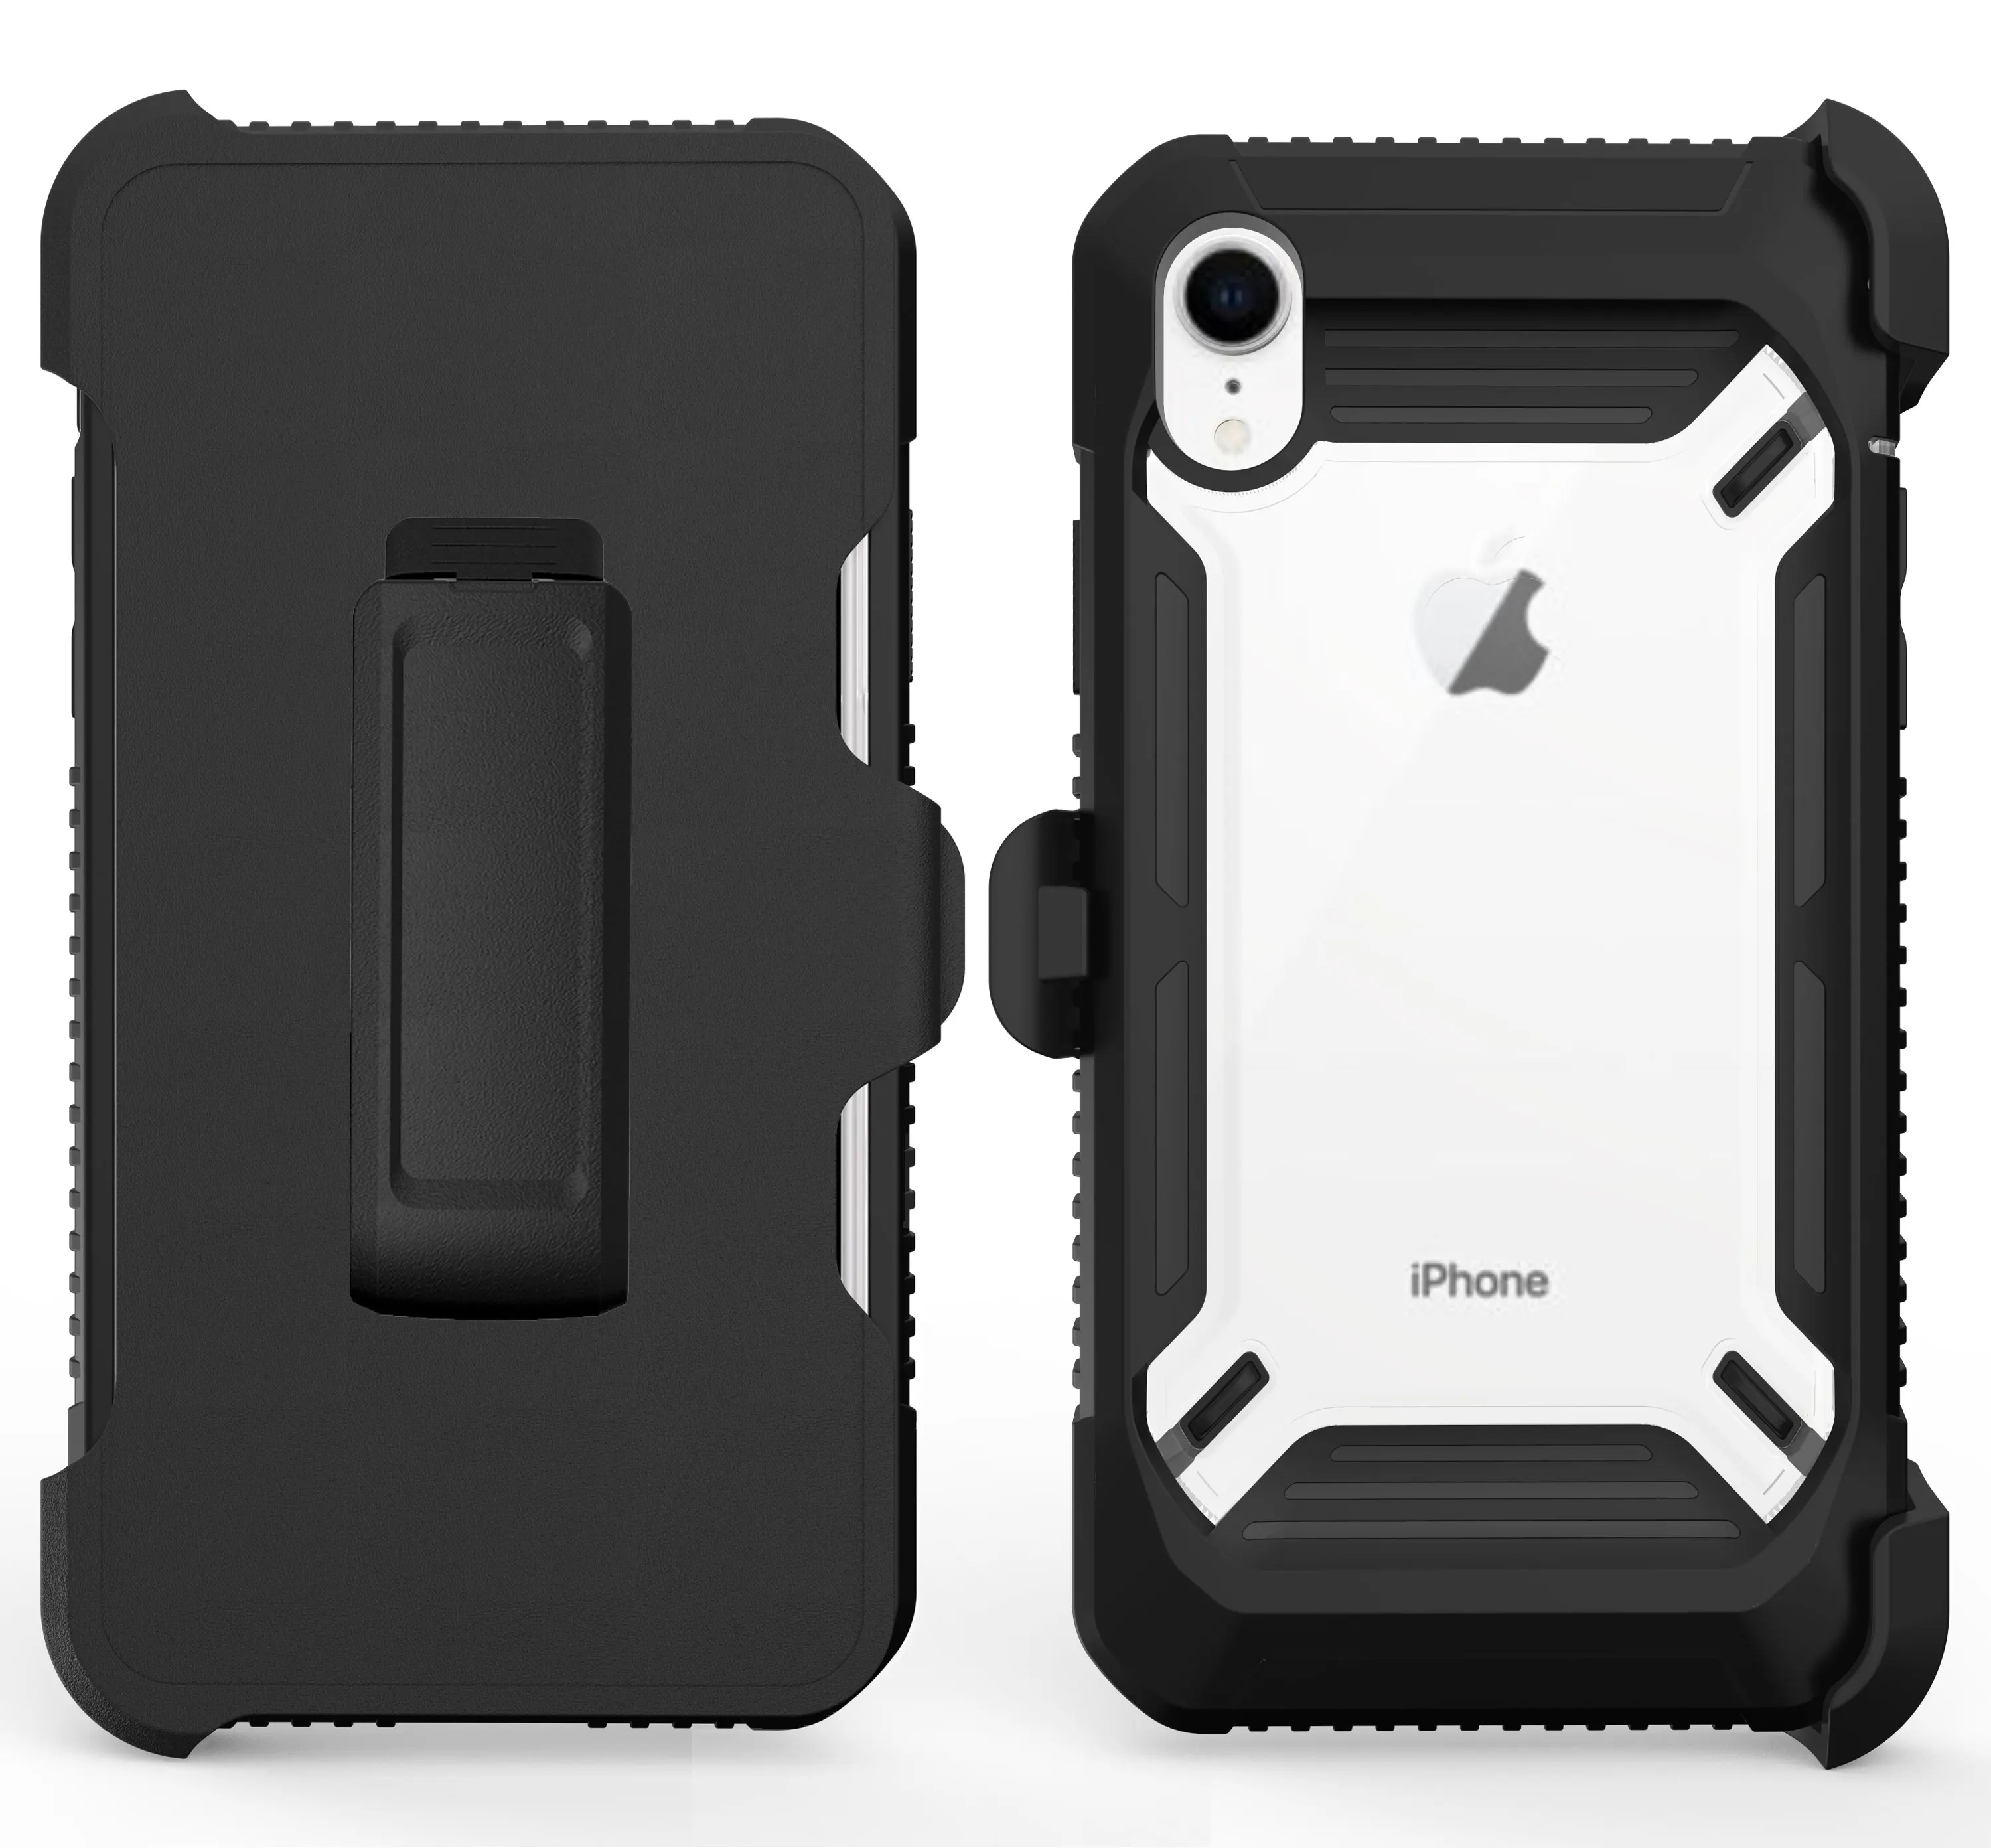 

Aicoo Shockproof Newest Design Hybrid Armor Phone Case For iPhone xs max 2 In 1 Soft Tpu Phone Cover, N/a